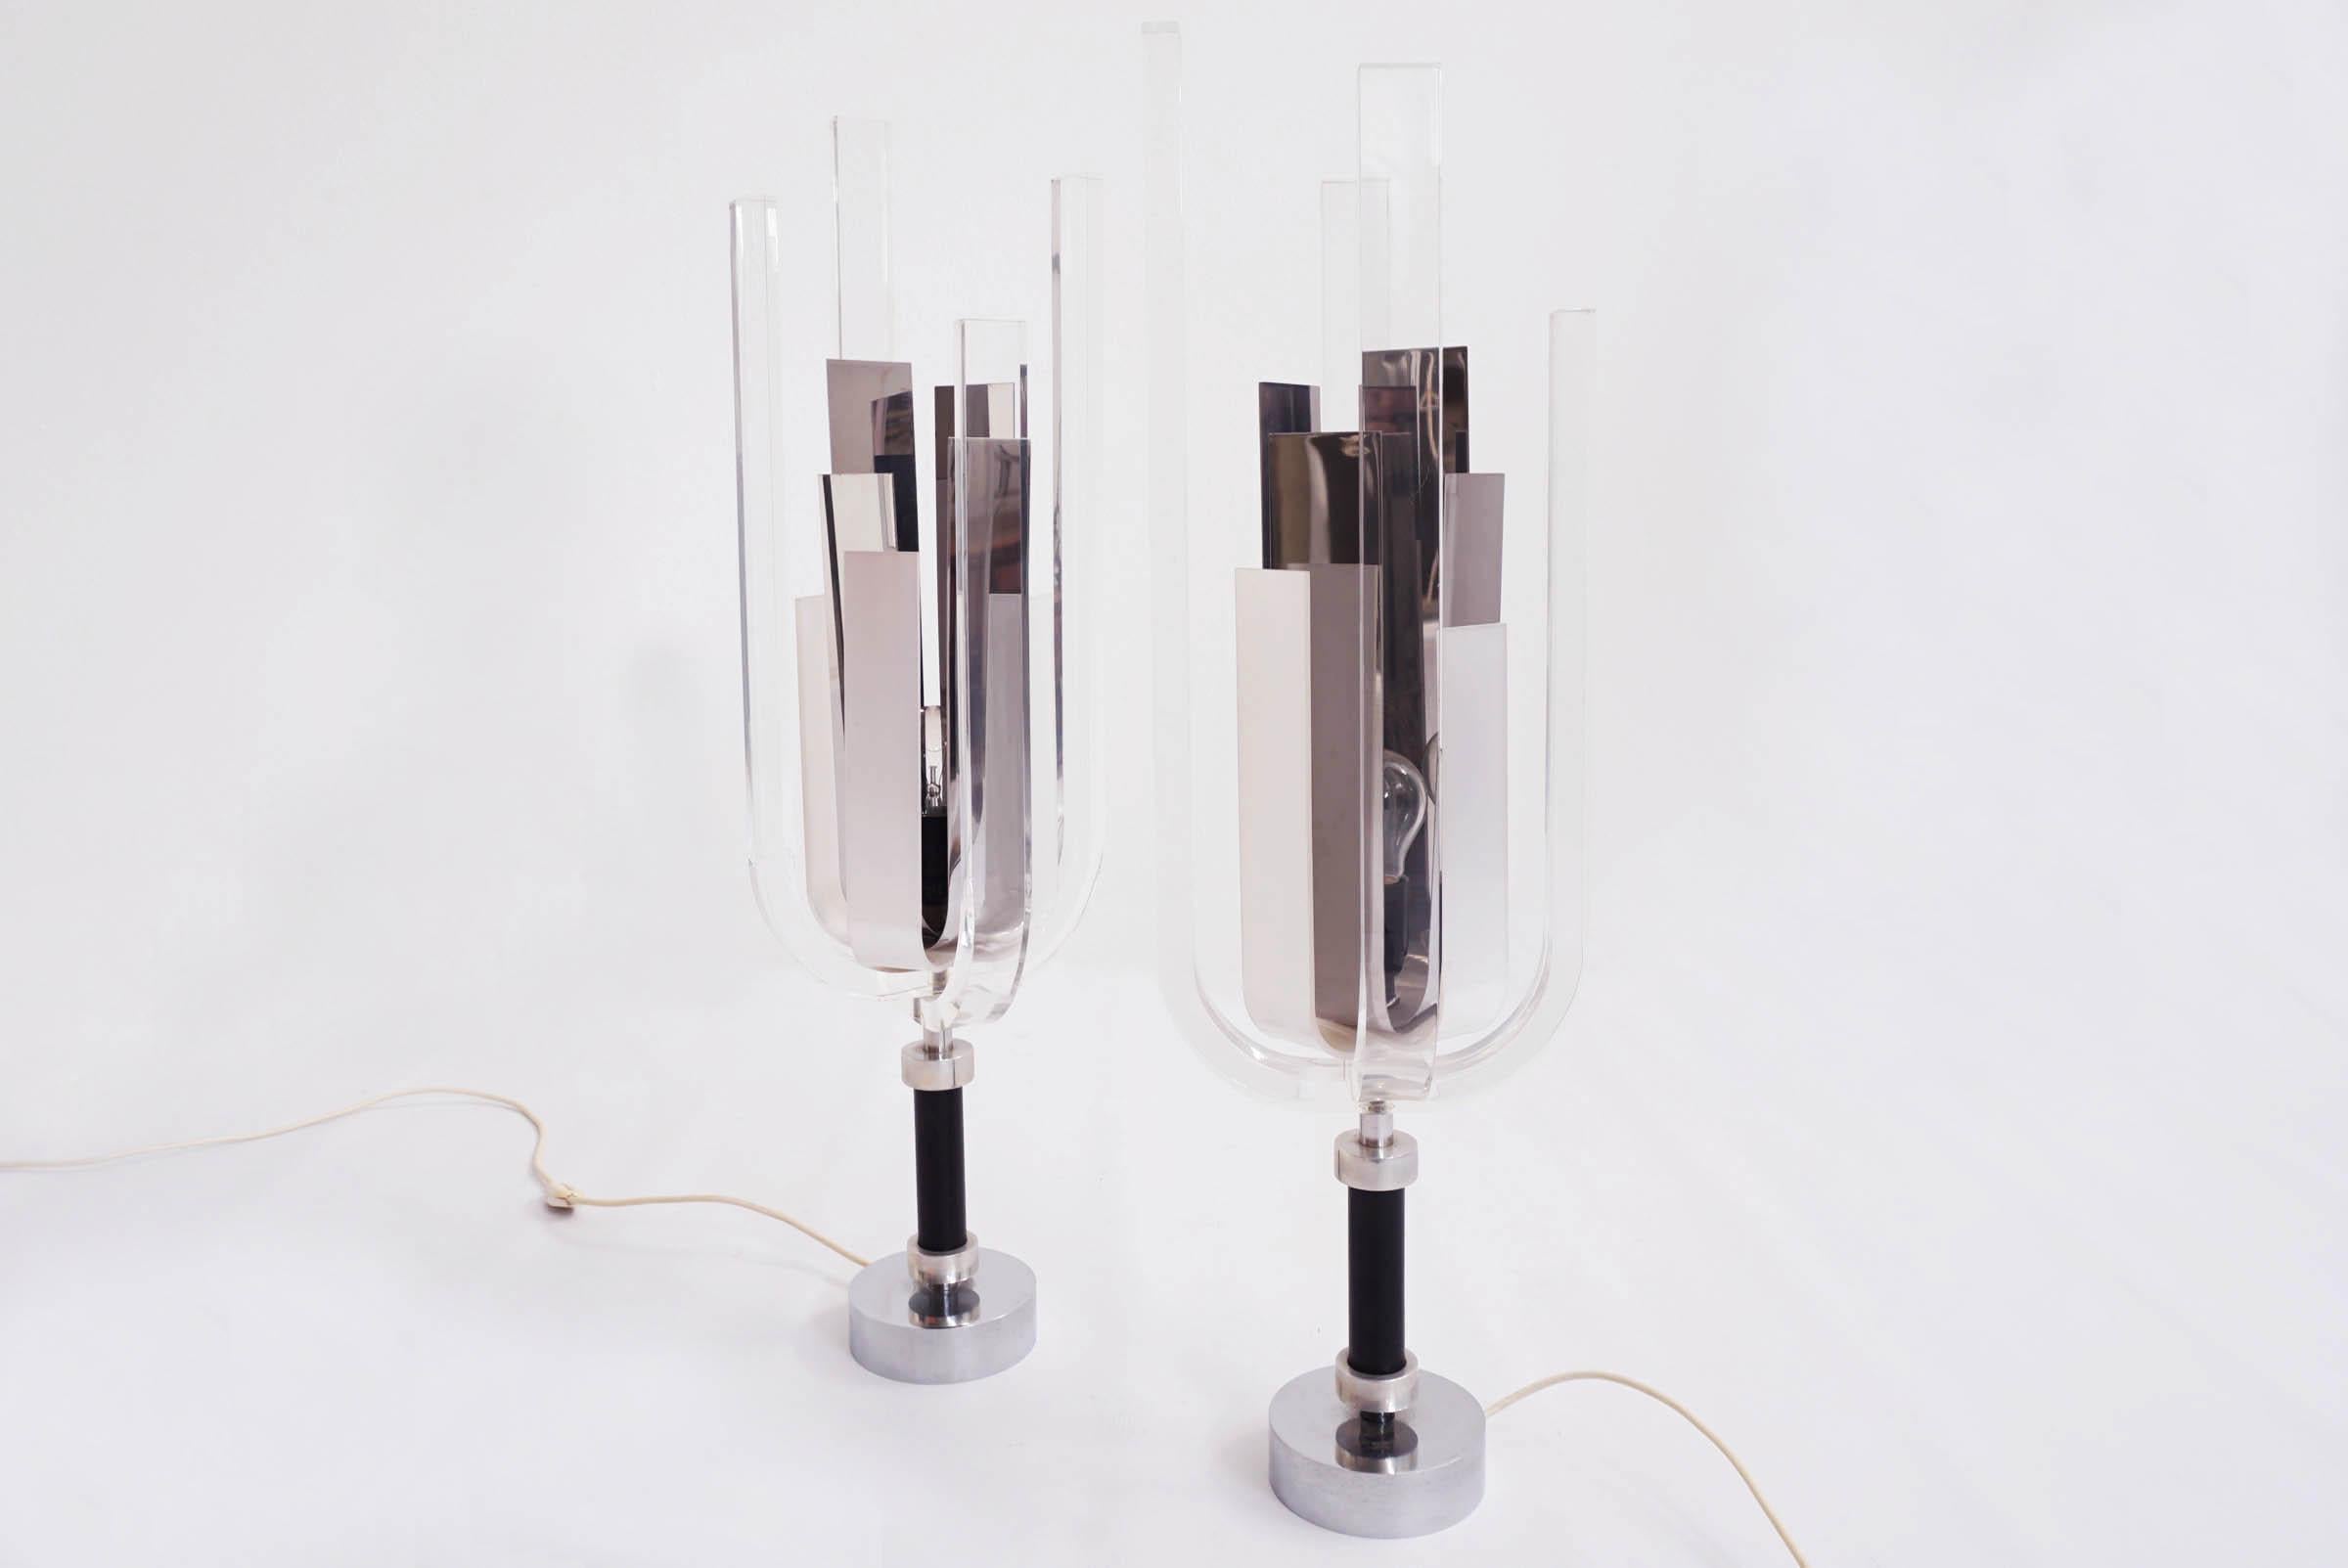 Sparkling lamps in curved plexiglass, mirror polished steel, black leather. Truly unique and luxurious objects.